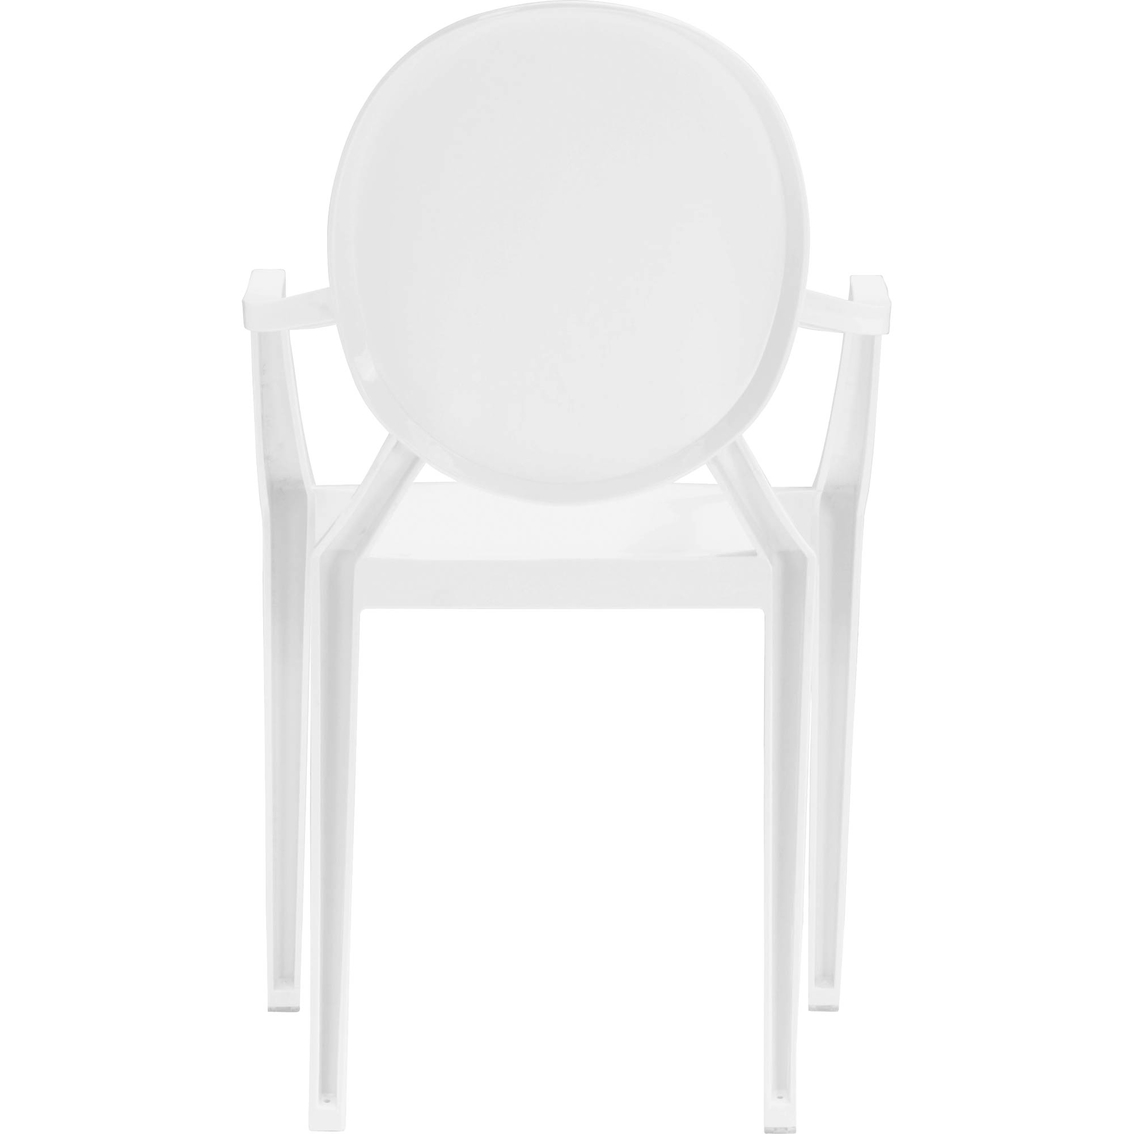 Zuo Modern Anime Dining Chair White (Set of 4) - Image 4 of 4